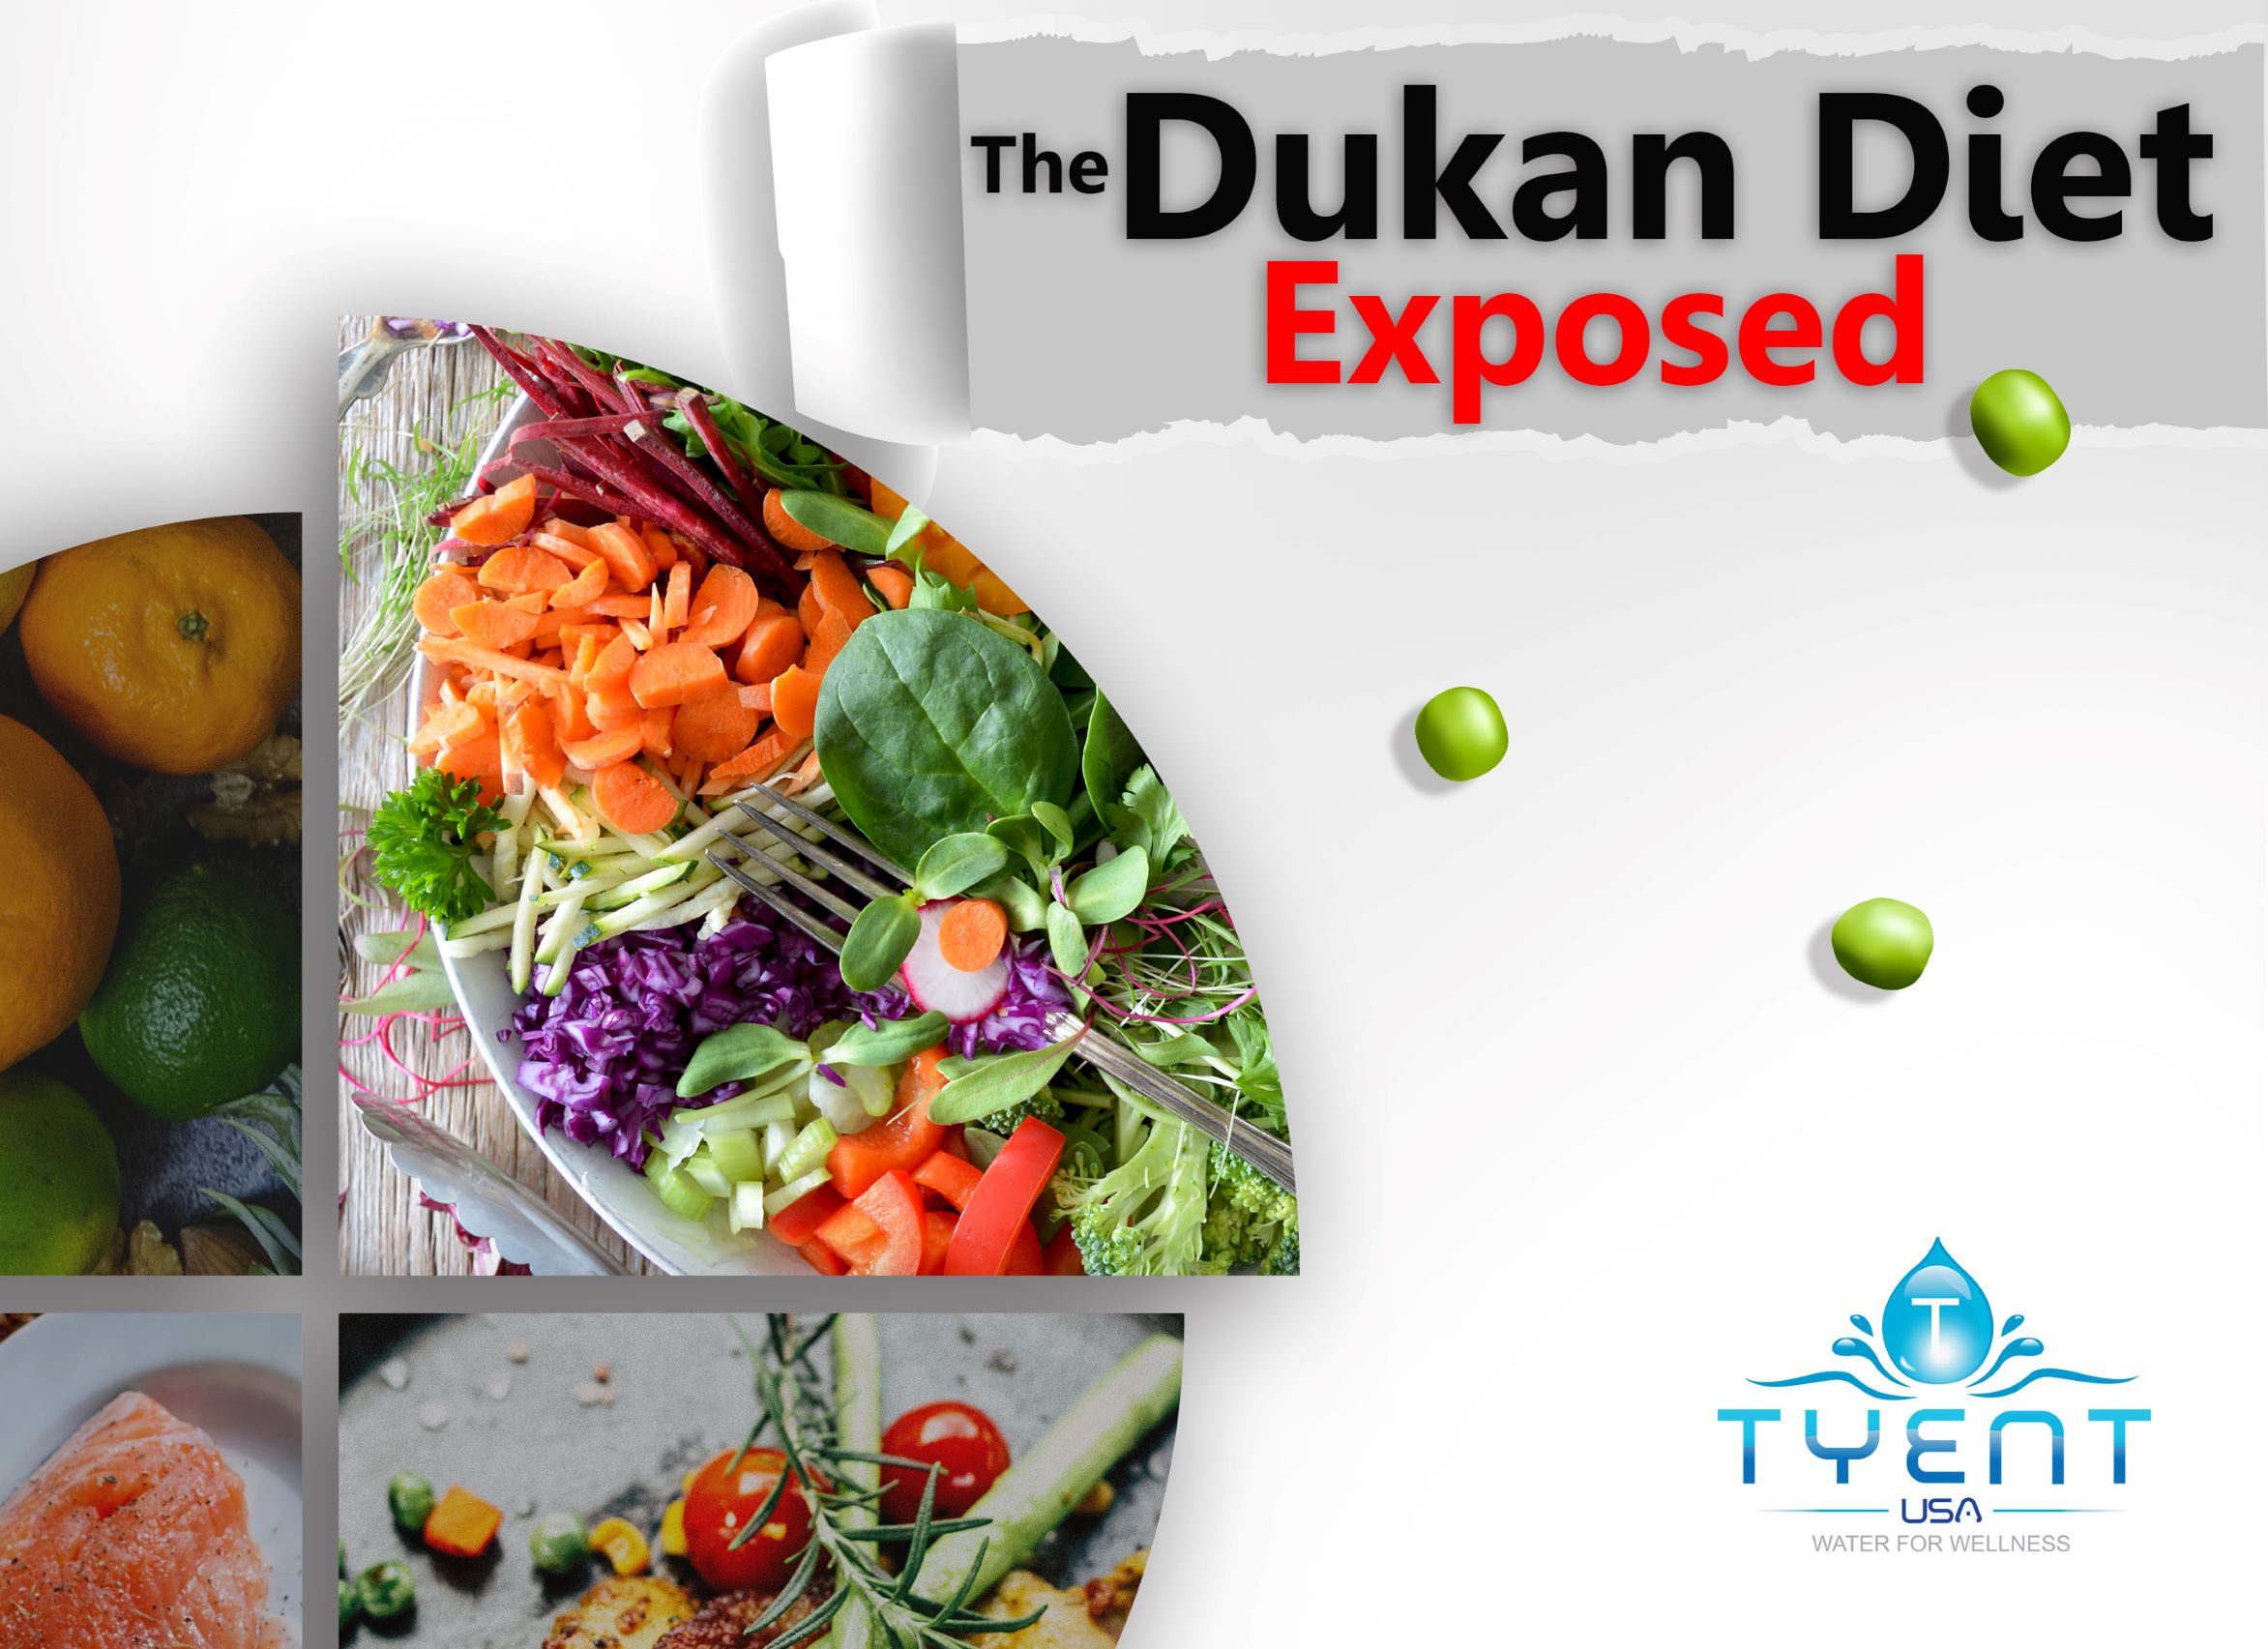 The Dukan Diet and Hydrogen Water